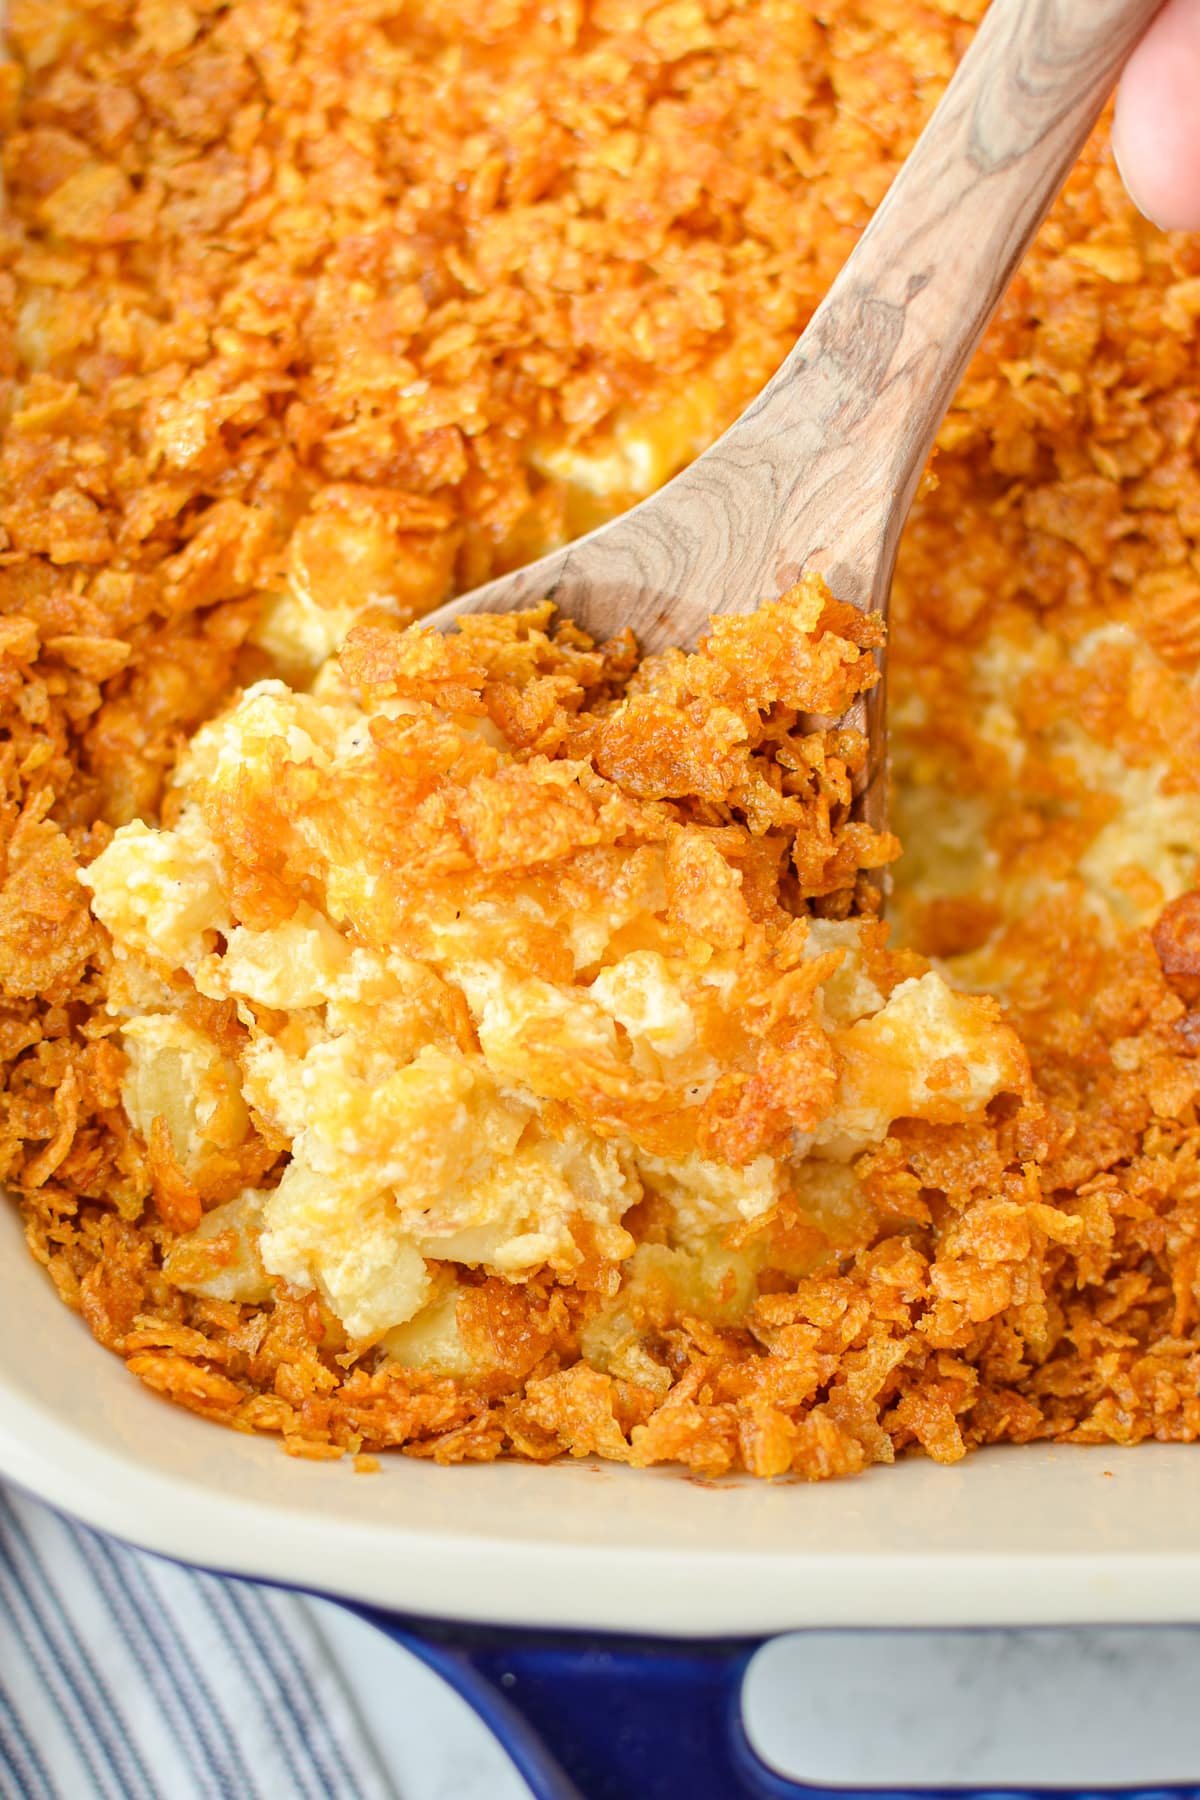 Scooping a portion of hash brown casserole from a baking dish.